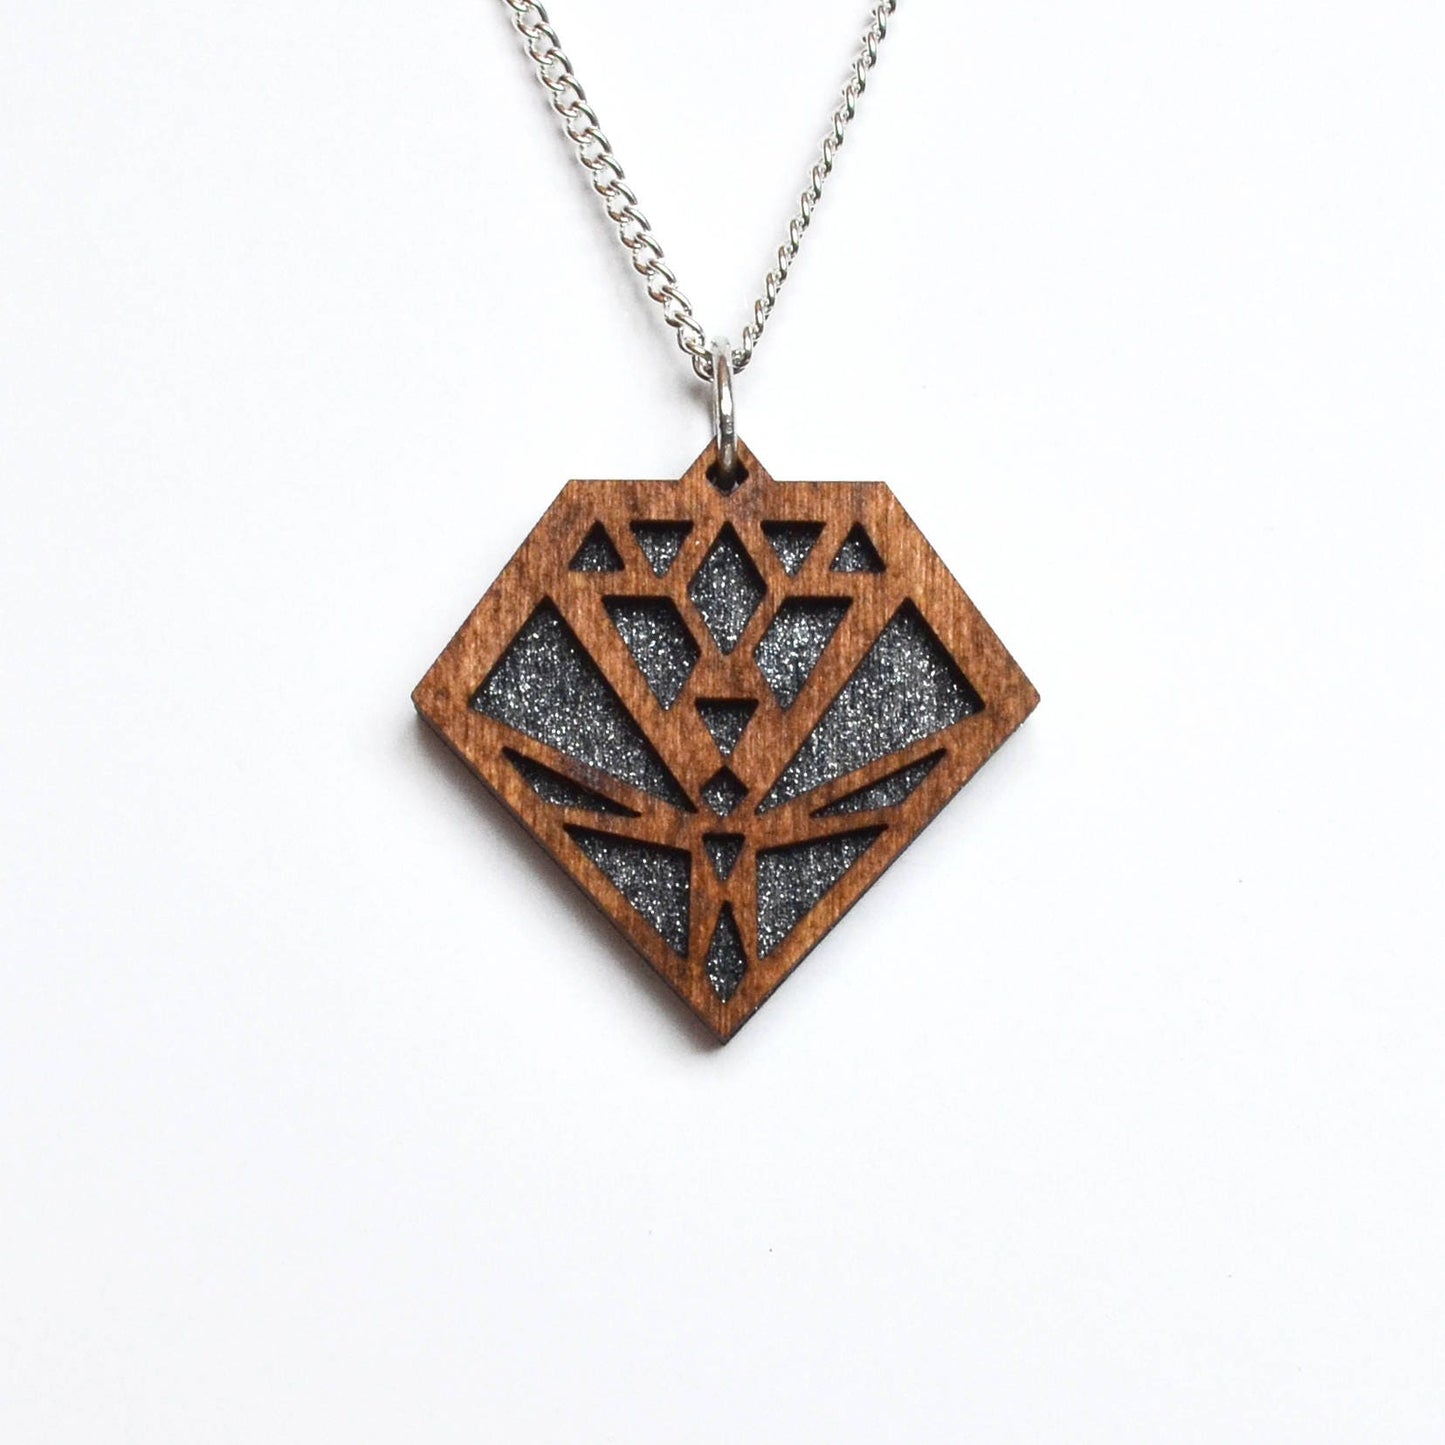 Hand Painted Wooden Art Deco Geometric Laser Cut Necklace - Small Style Design 4